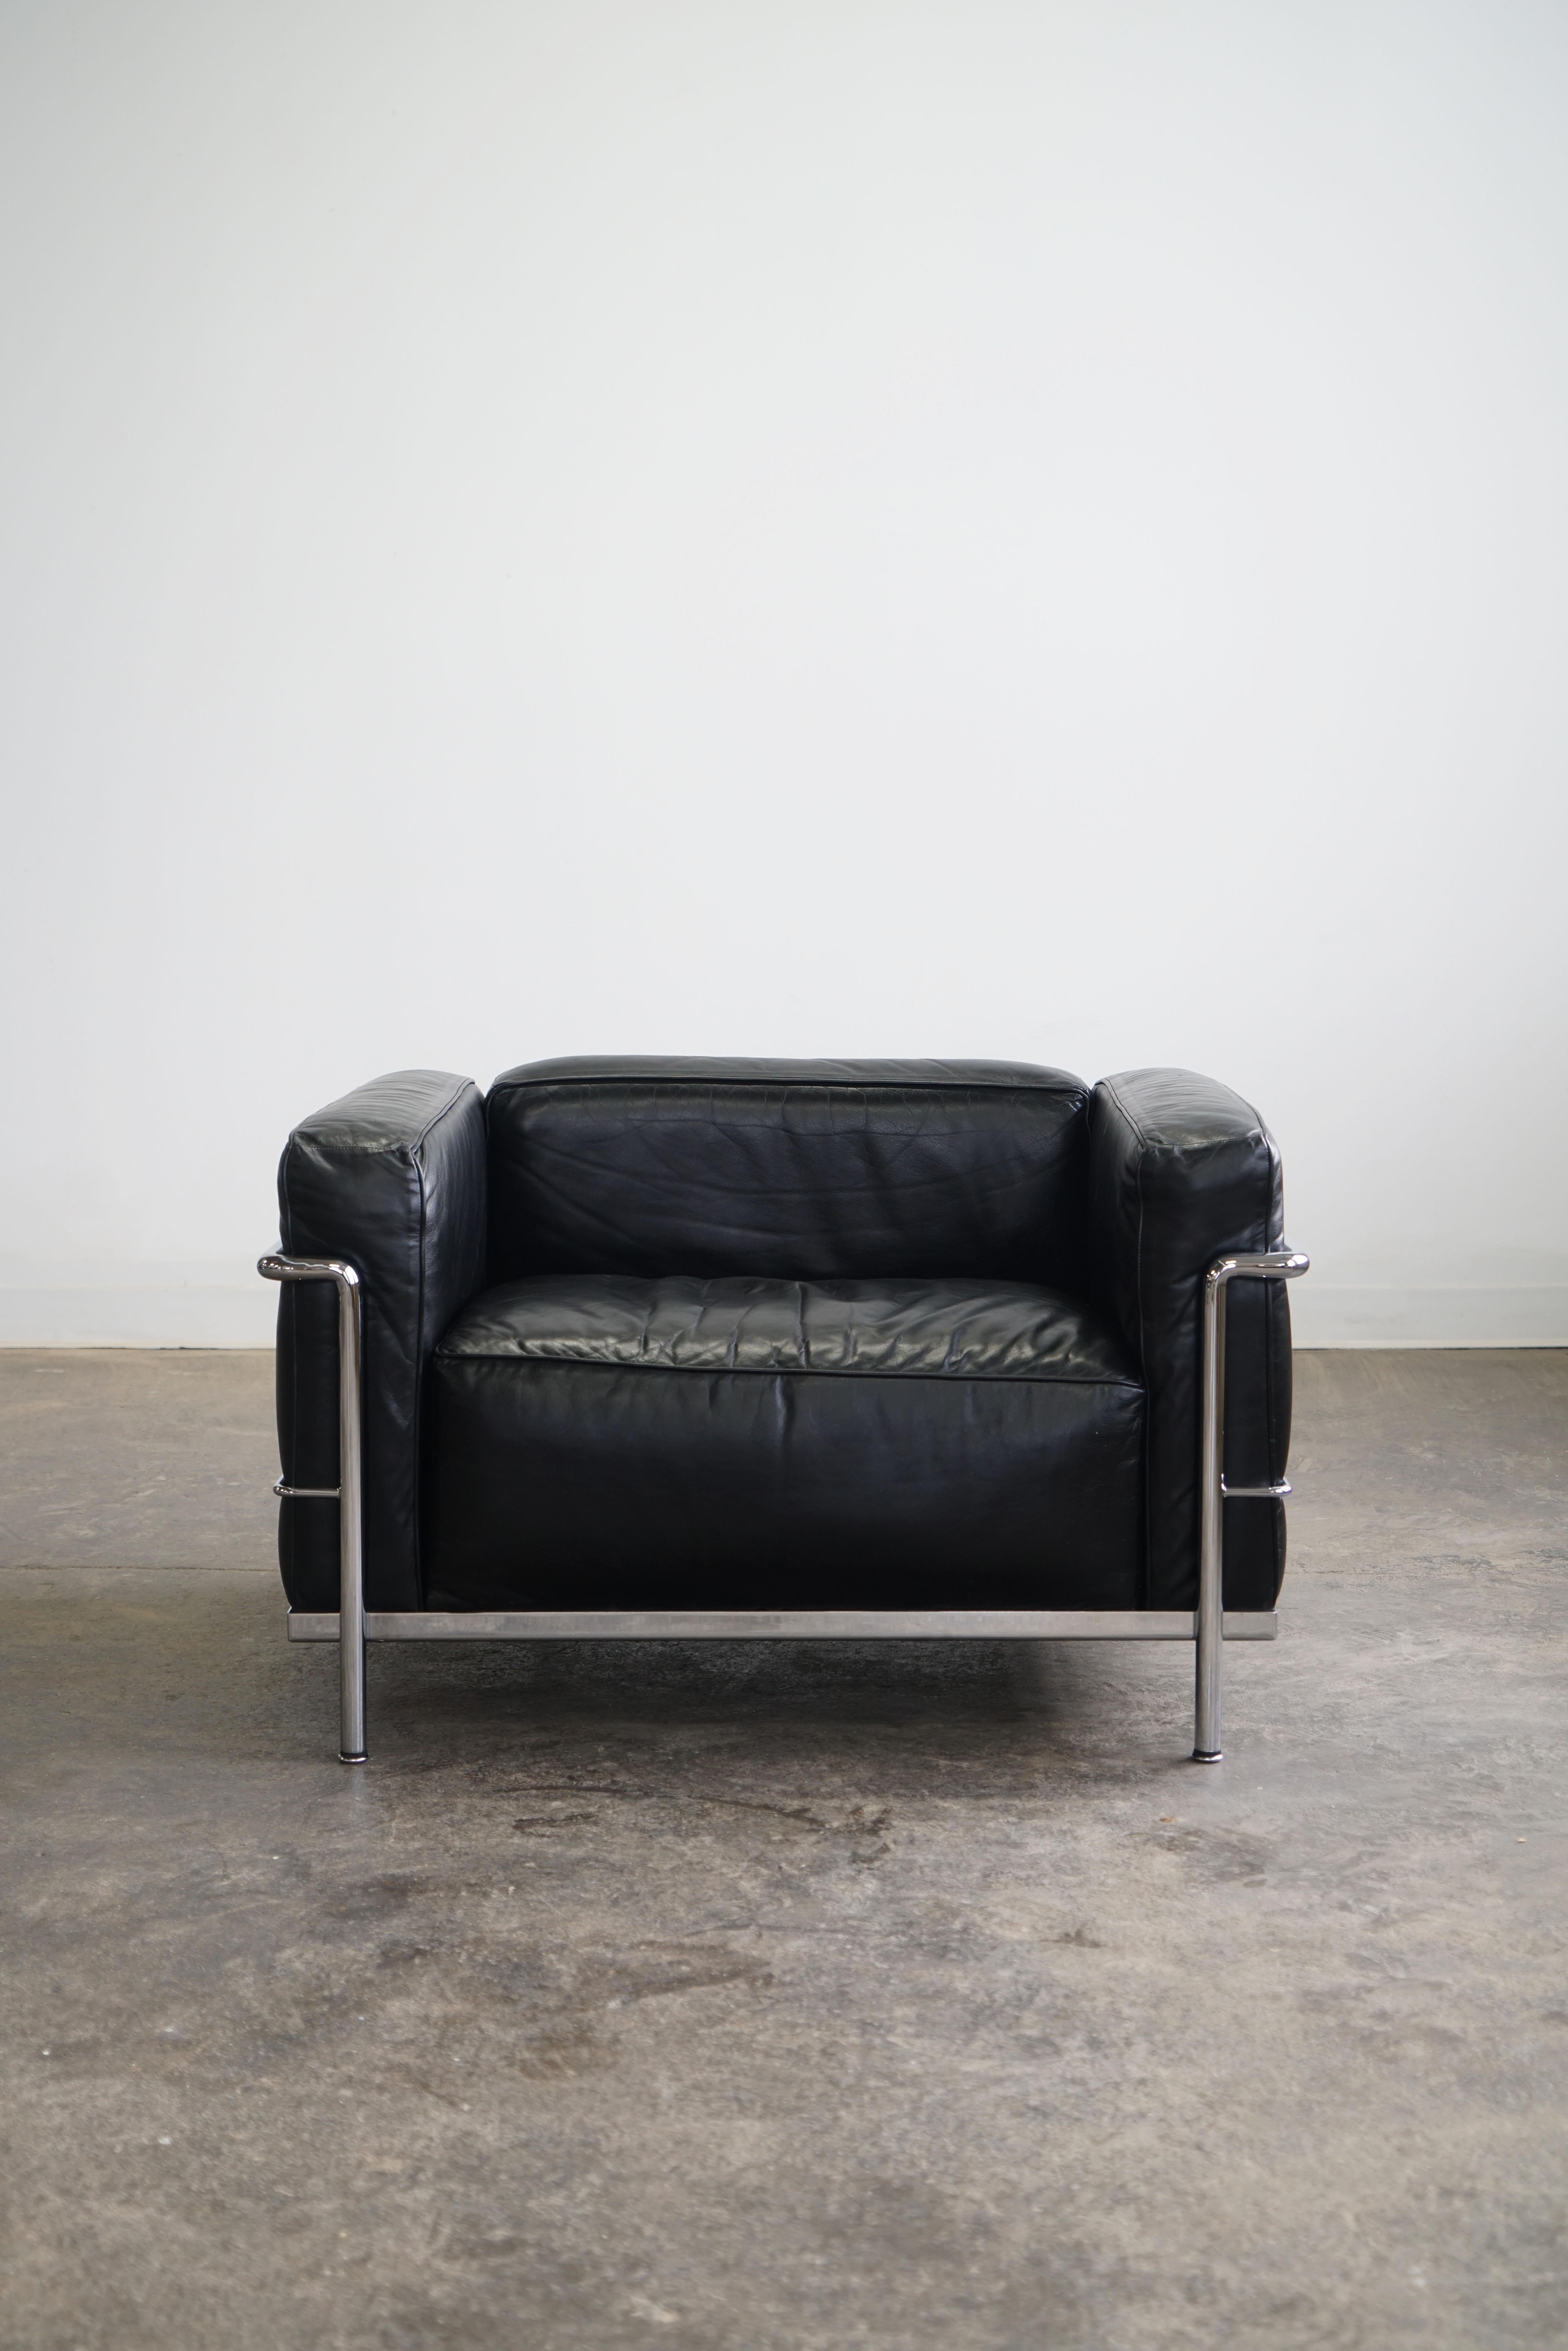 Pair of LC3 Grand Modele Armchairs for Cassina.
Black leather and chrome plated steel.

One of the most iconic chairs, the LC3 was designed in 1928 by Le Corbusier, Pierre Jeanneret, and Charlotte Perriand. The chair is a true symbol of timeless